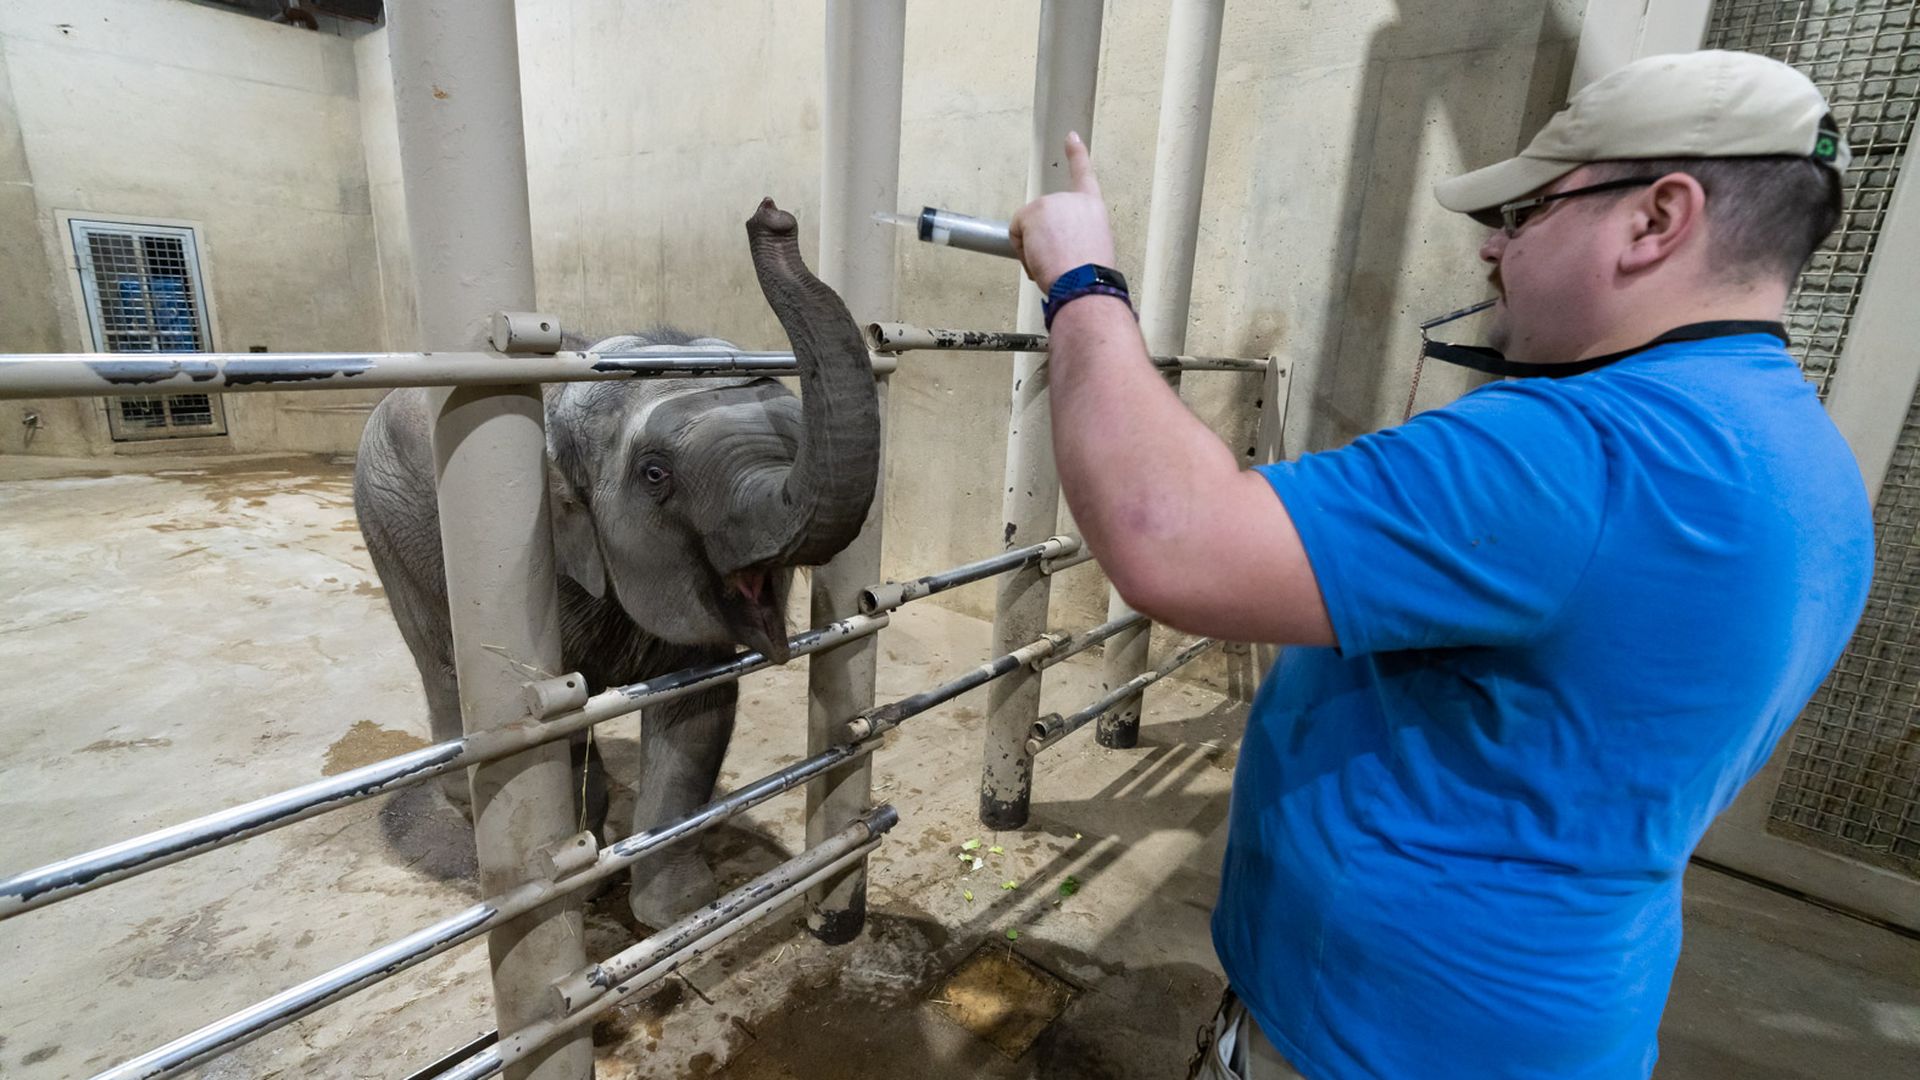 A zookeeper holds a syringe of saline near Frankie, an Asian elephant calf, as he lifts his trunk